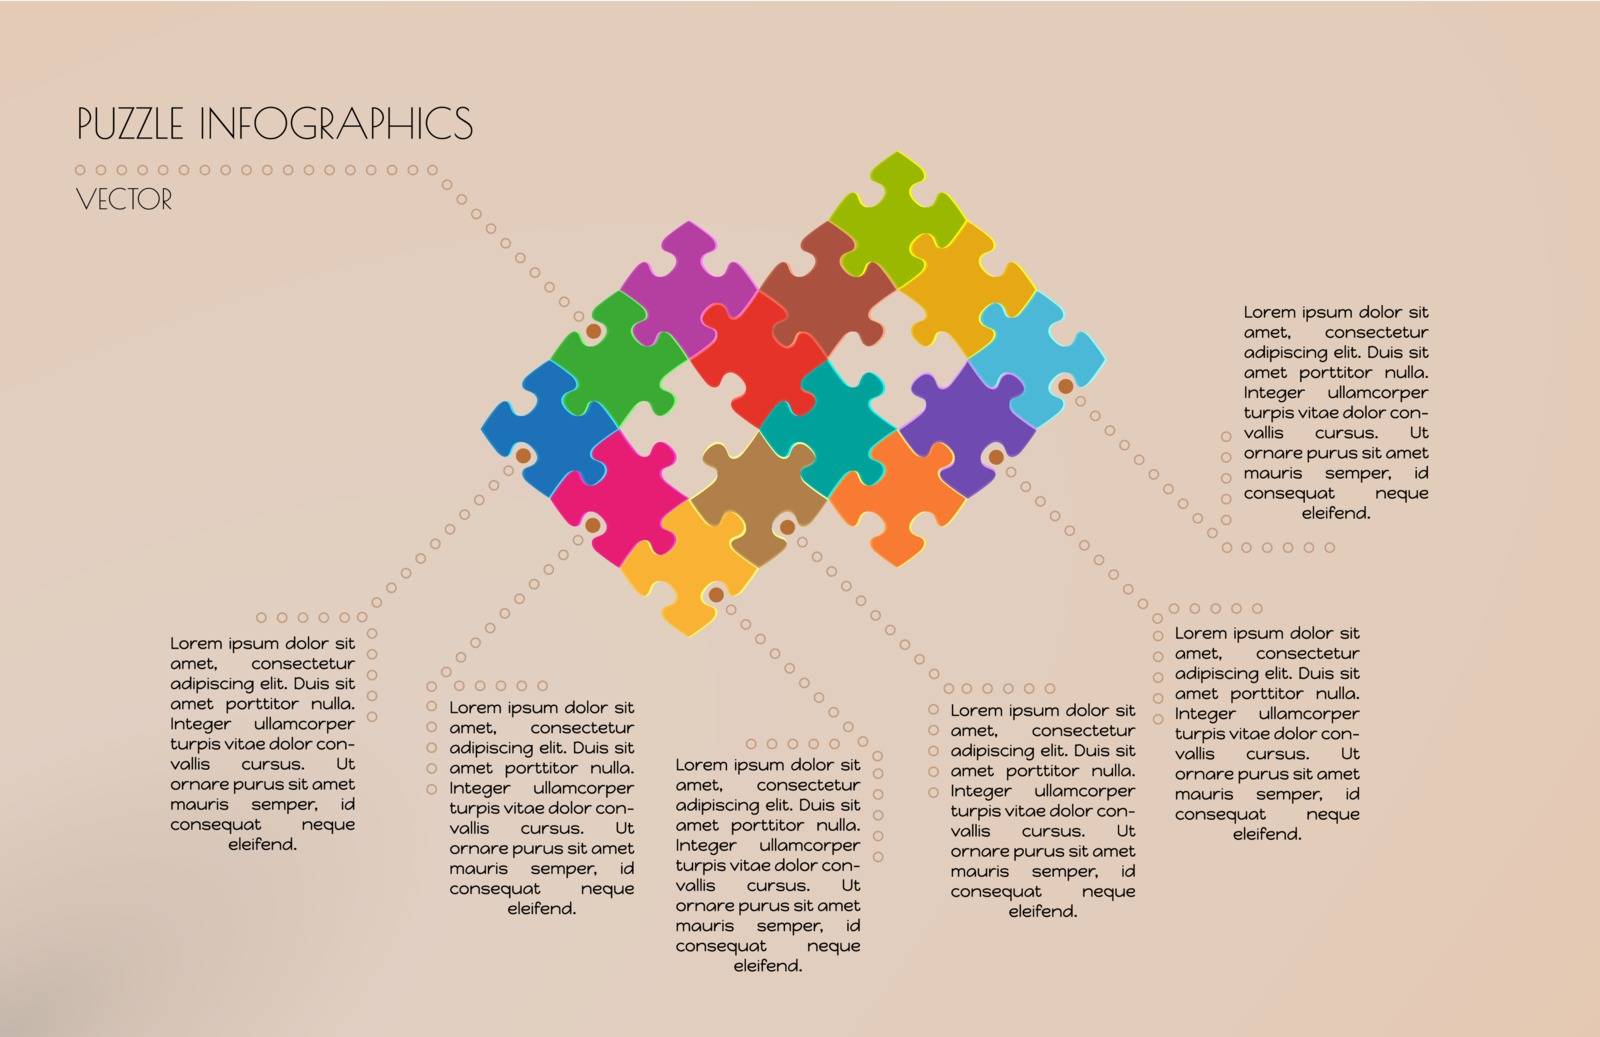 infographic vector with puzzle pieces on brown background